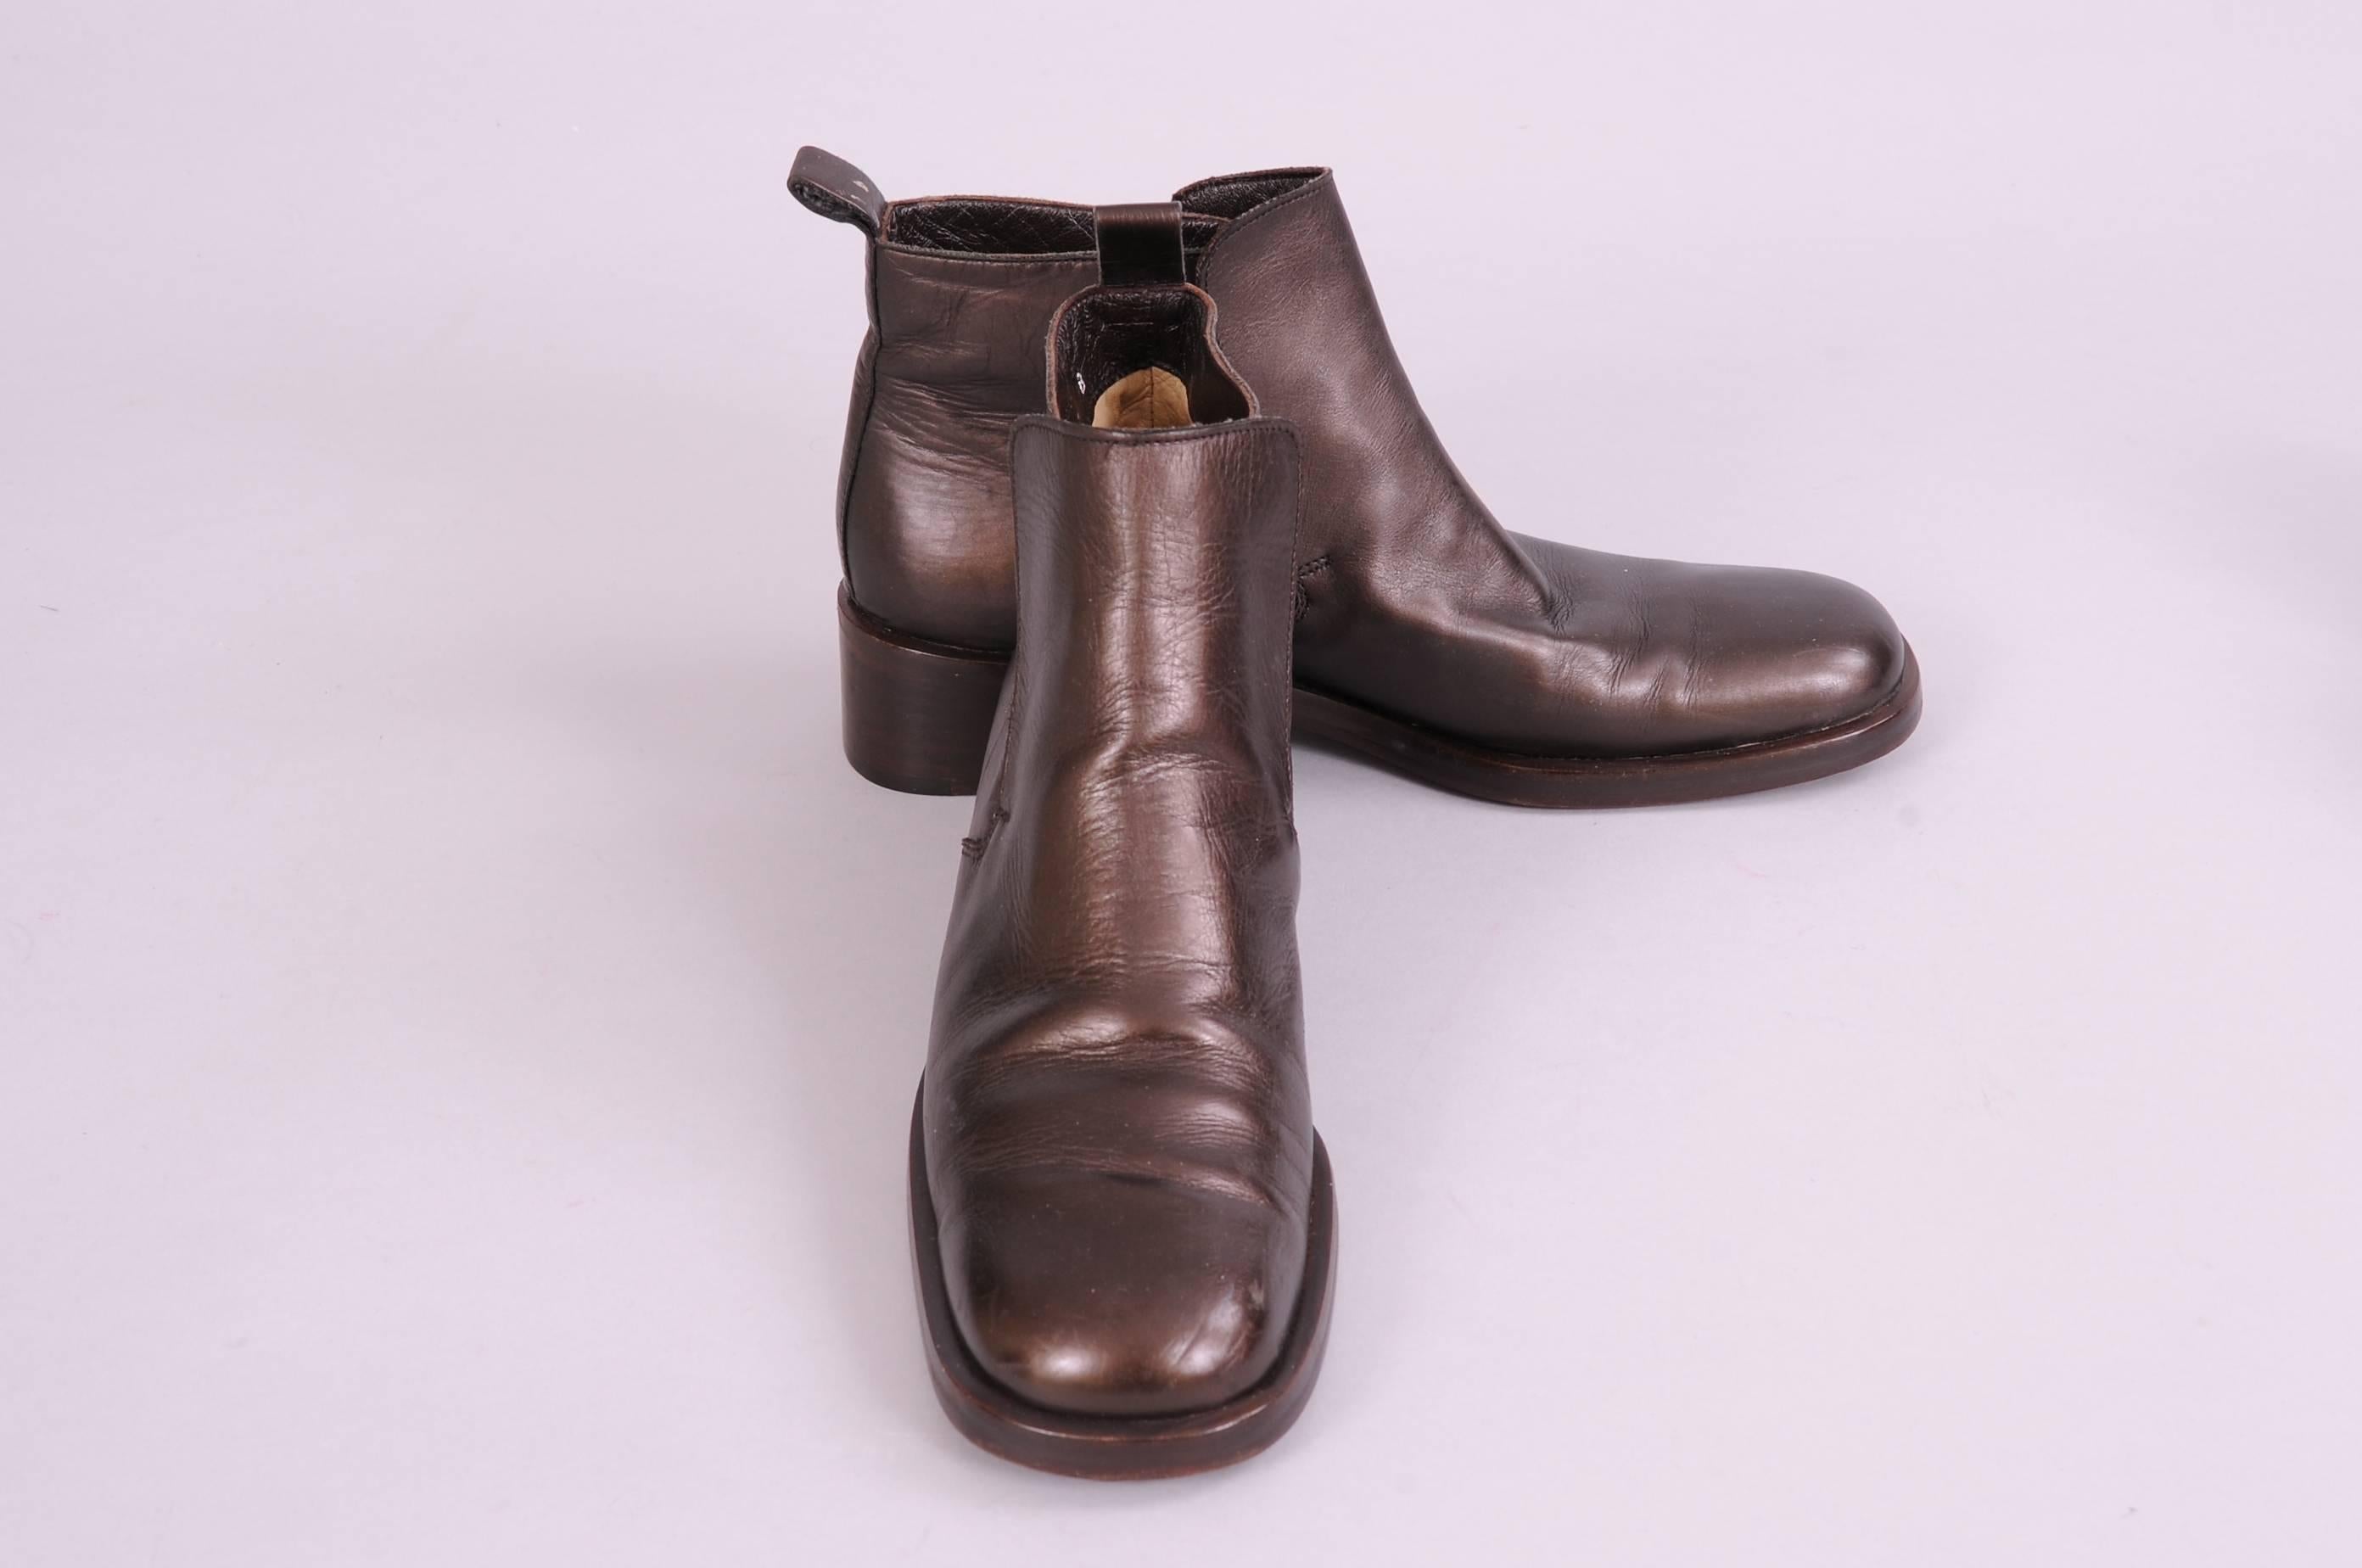 Brown leather with a hint of bronze metallic is used for this pull on low boots from Gucci. They have an elastic band under the tongue and a leather loop at the heel. The boots are fully leather lined, they have leather soles and have never been